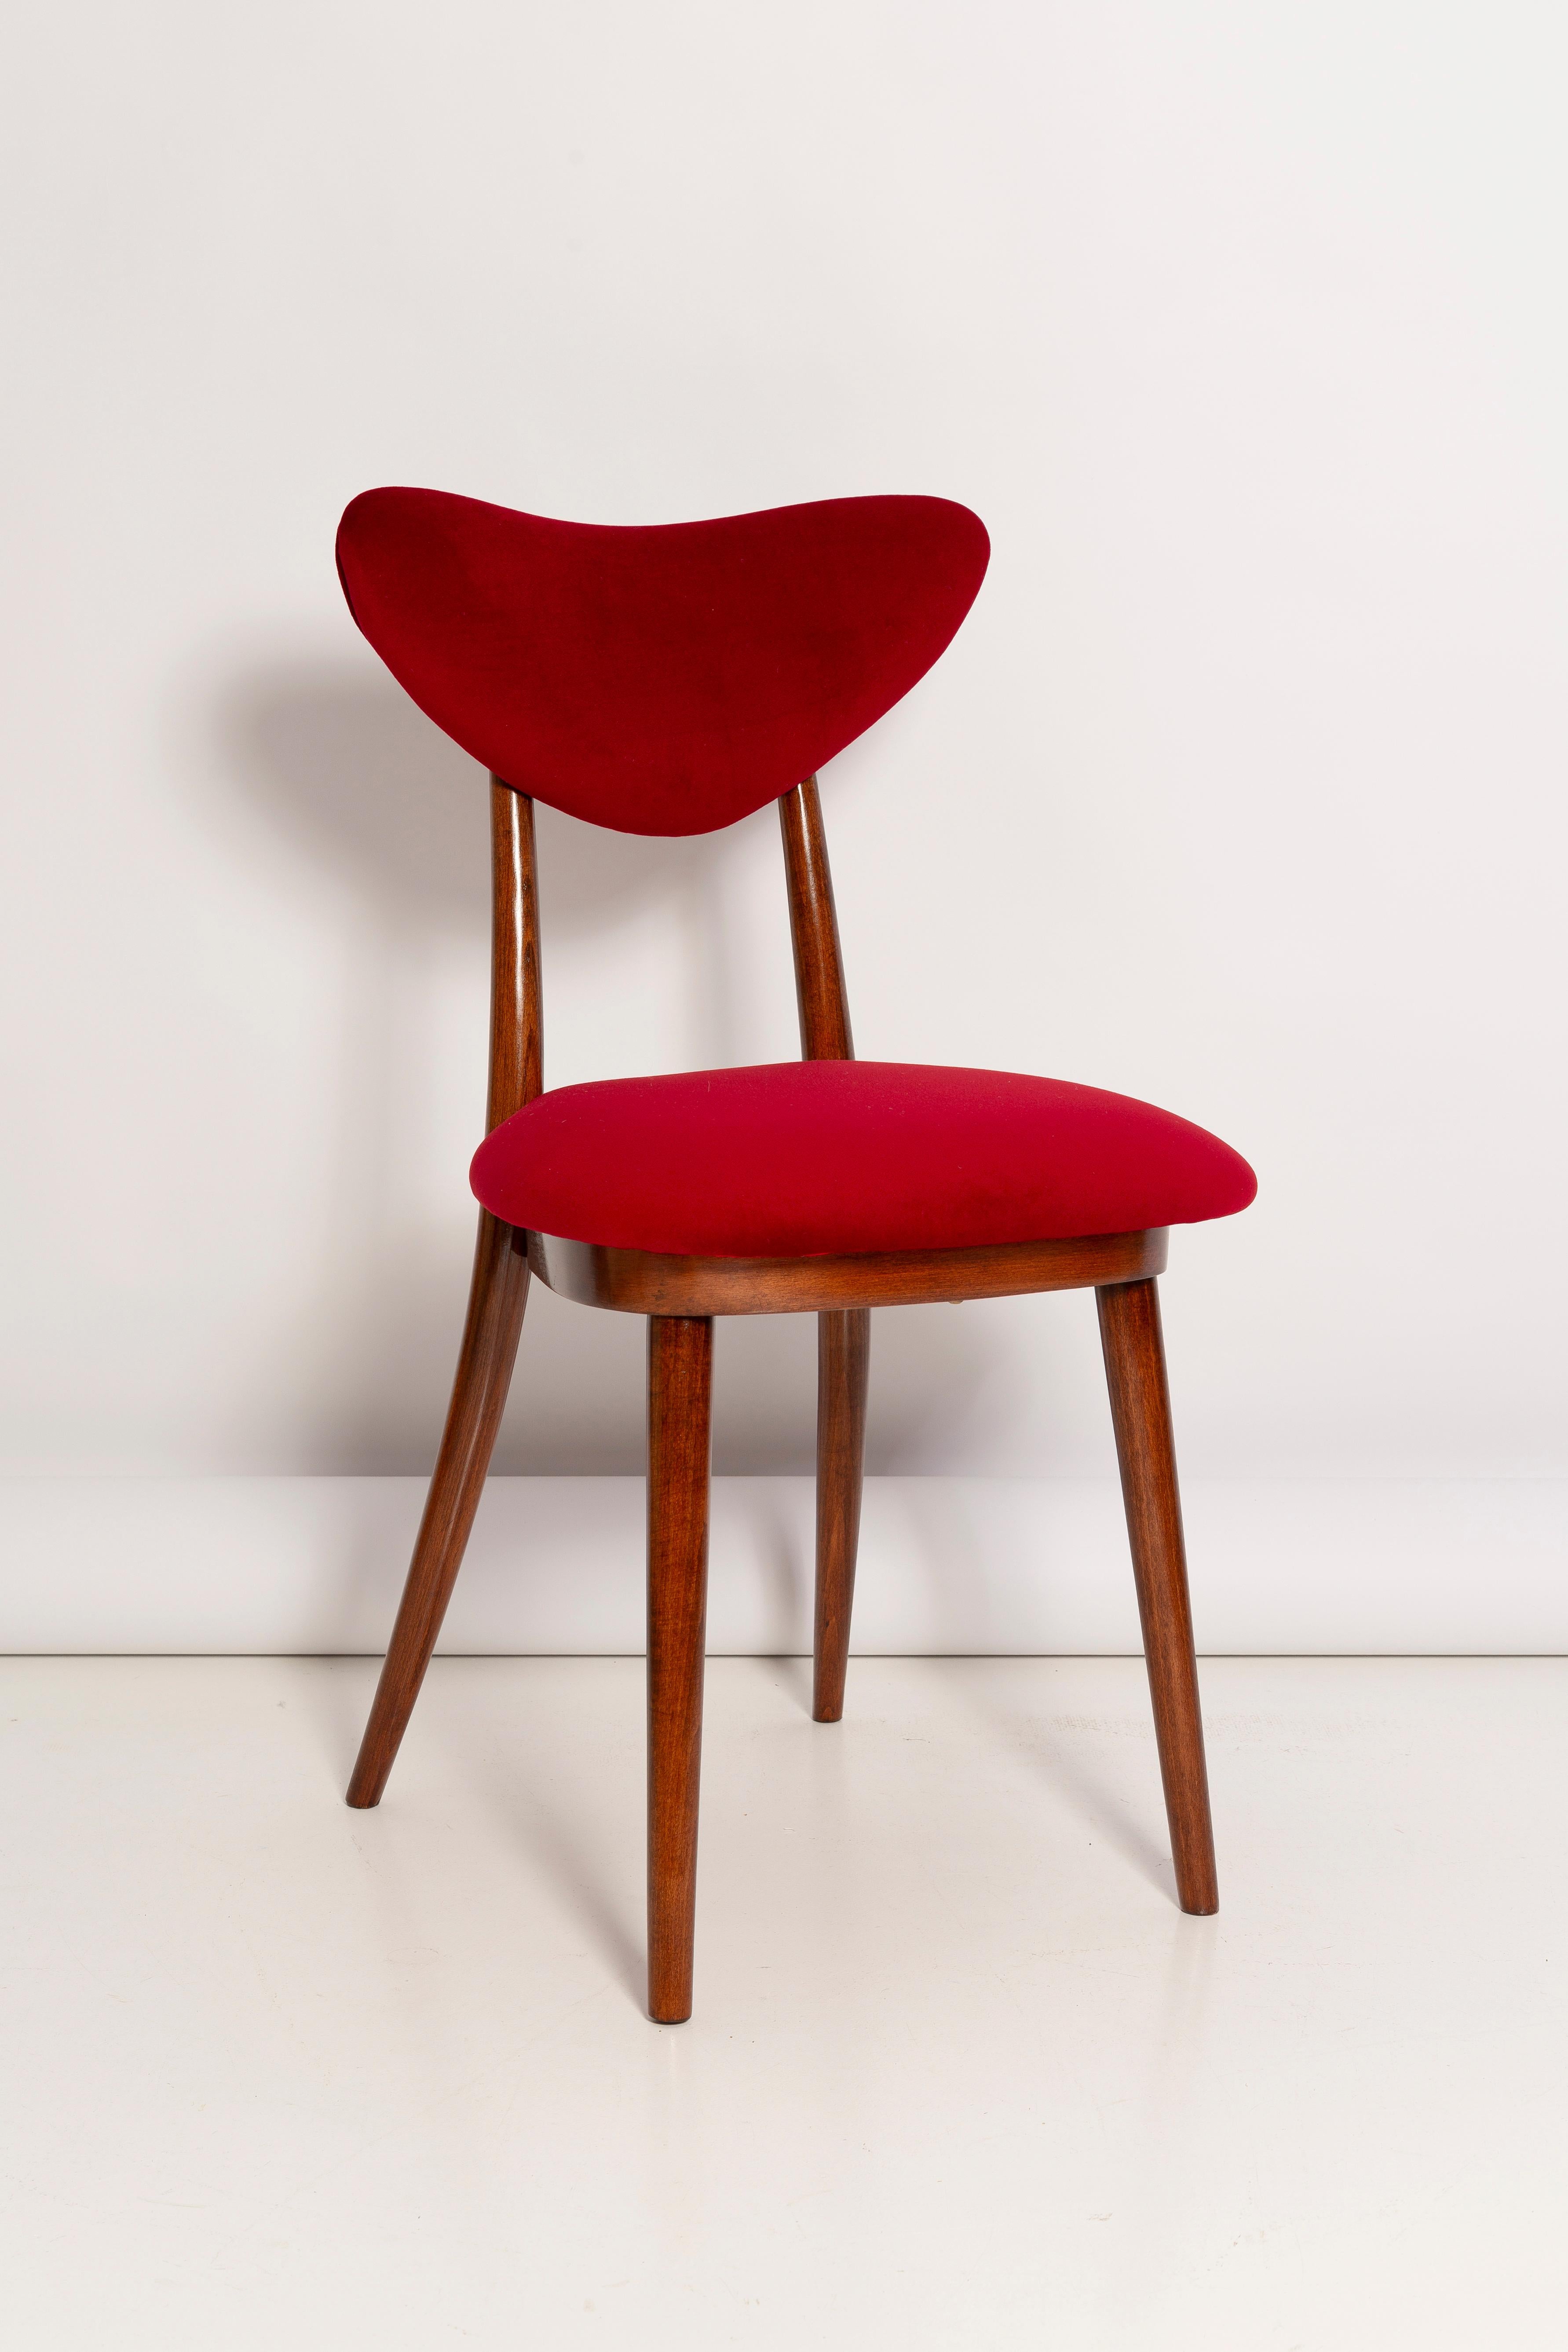 20th Century Set of Twelve Mid Century Red Heart Chairs, Poland, 1960s For Sale